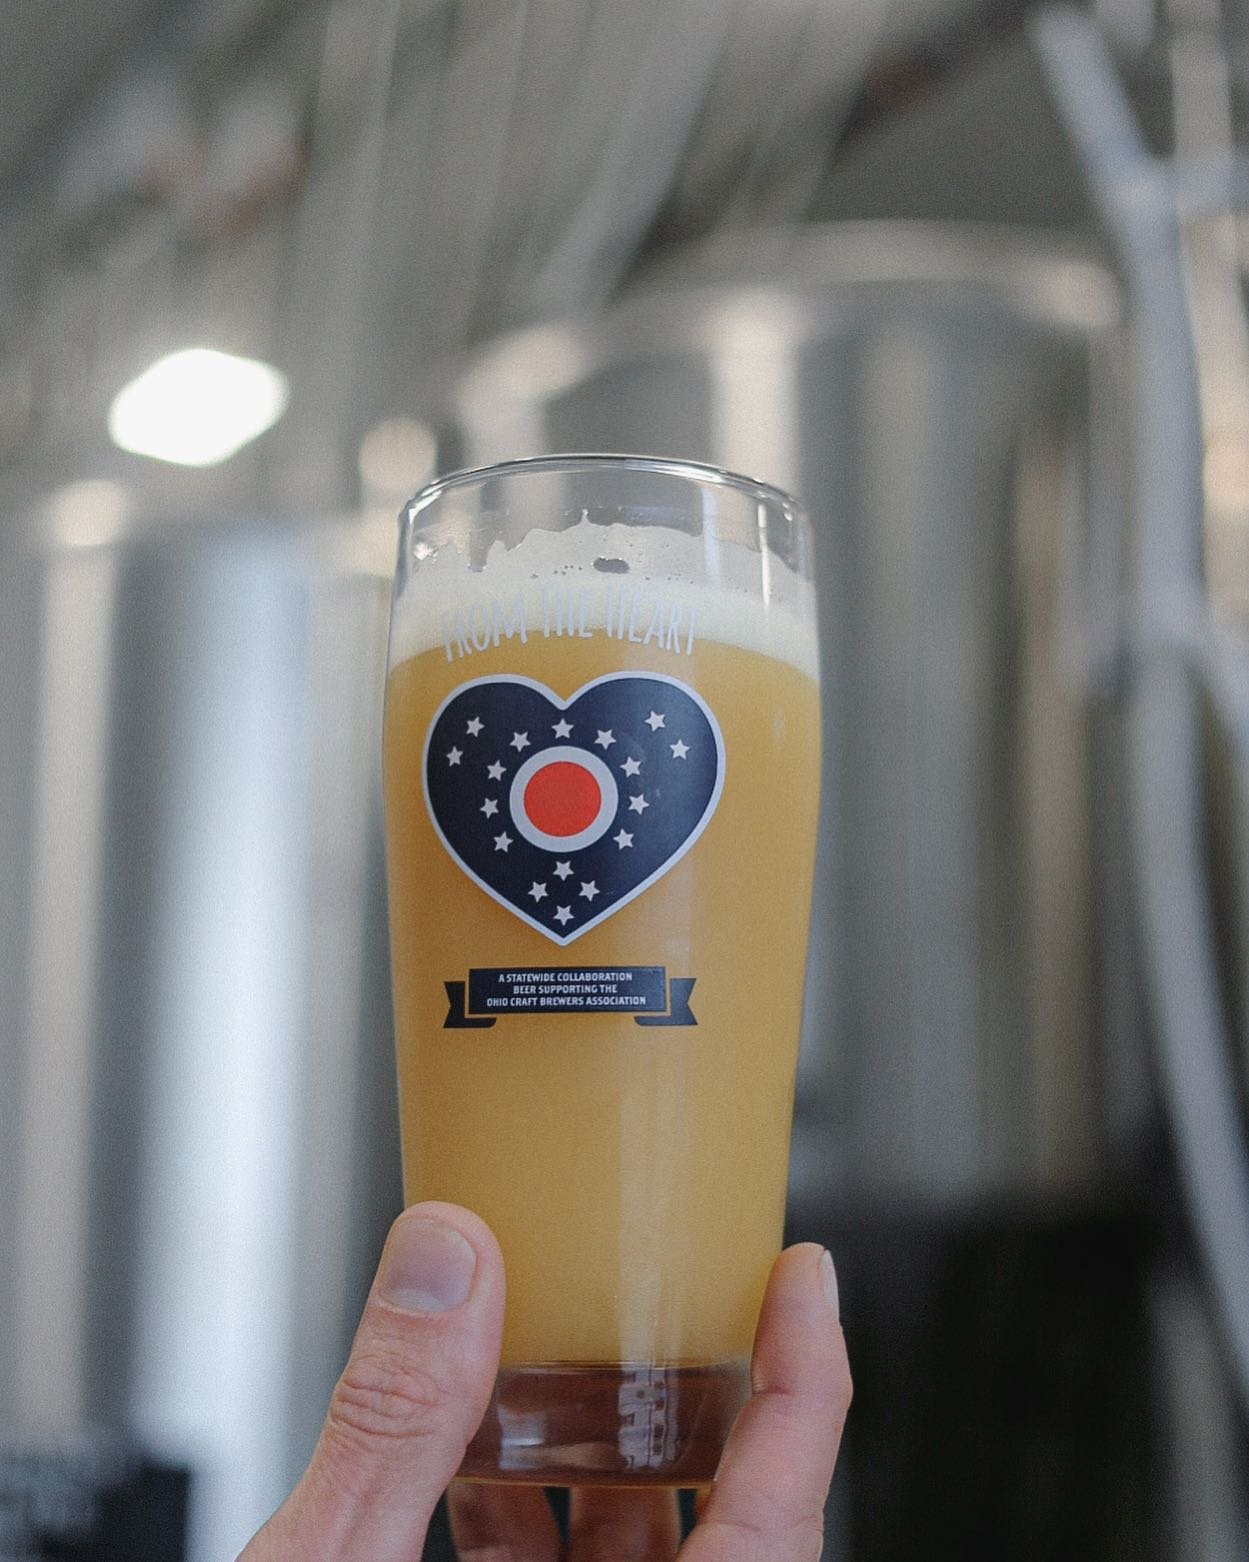 Released today! From the Heart, Volume 4
Order a pint of this year&rsquo;s collab beer at Henmick and receive a free glass to take home (while supplies last).

𝐅𝐫𝐨𝐦 𝐭𝐡𝐞 𝐇𝐞𝐚𝐫𝐭 | 𝐕𝐨𝐥𝐮𝐦𝐞 𝟒
Ohio breweries have teamed up with this speci